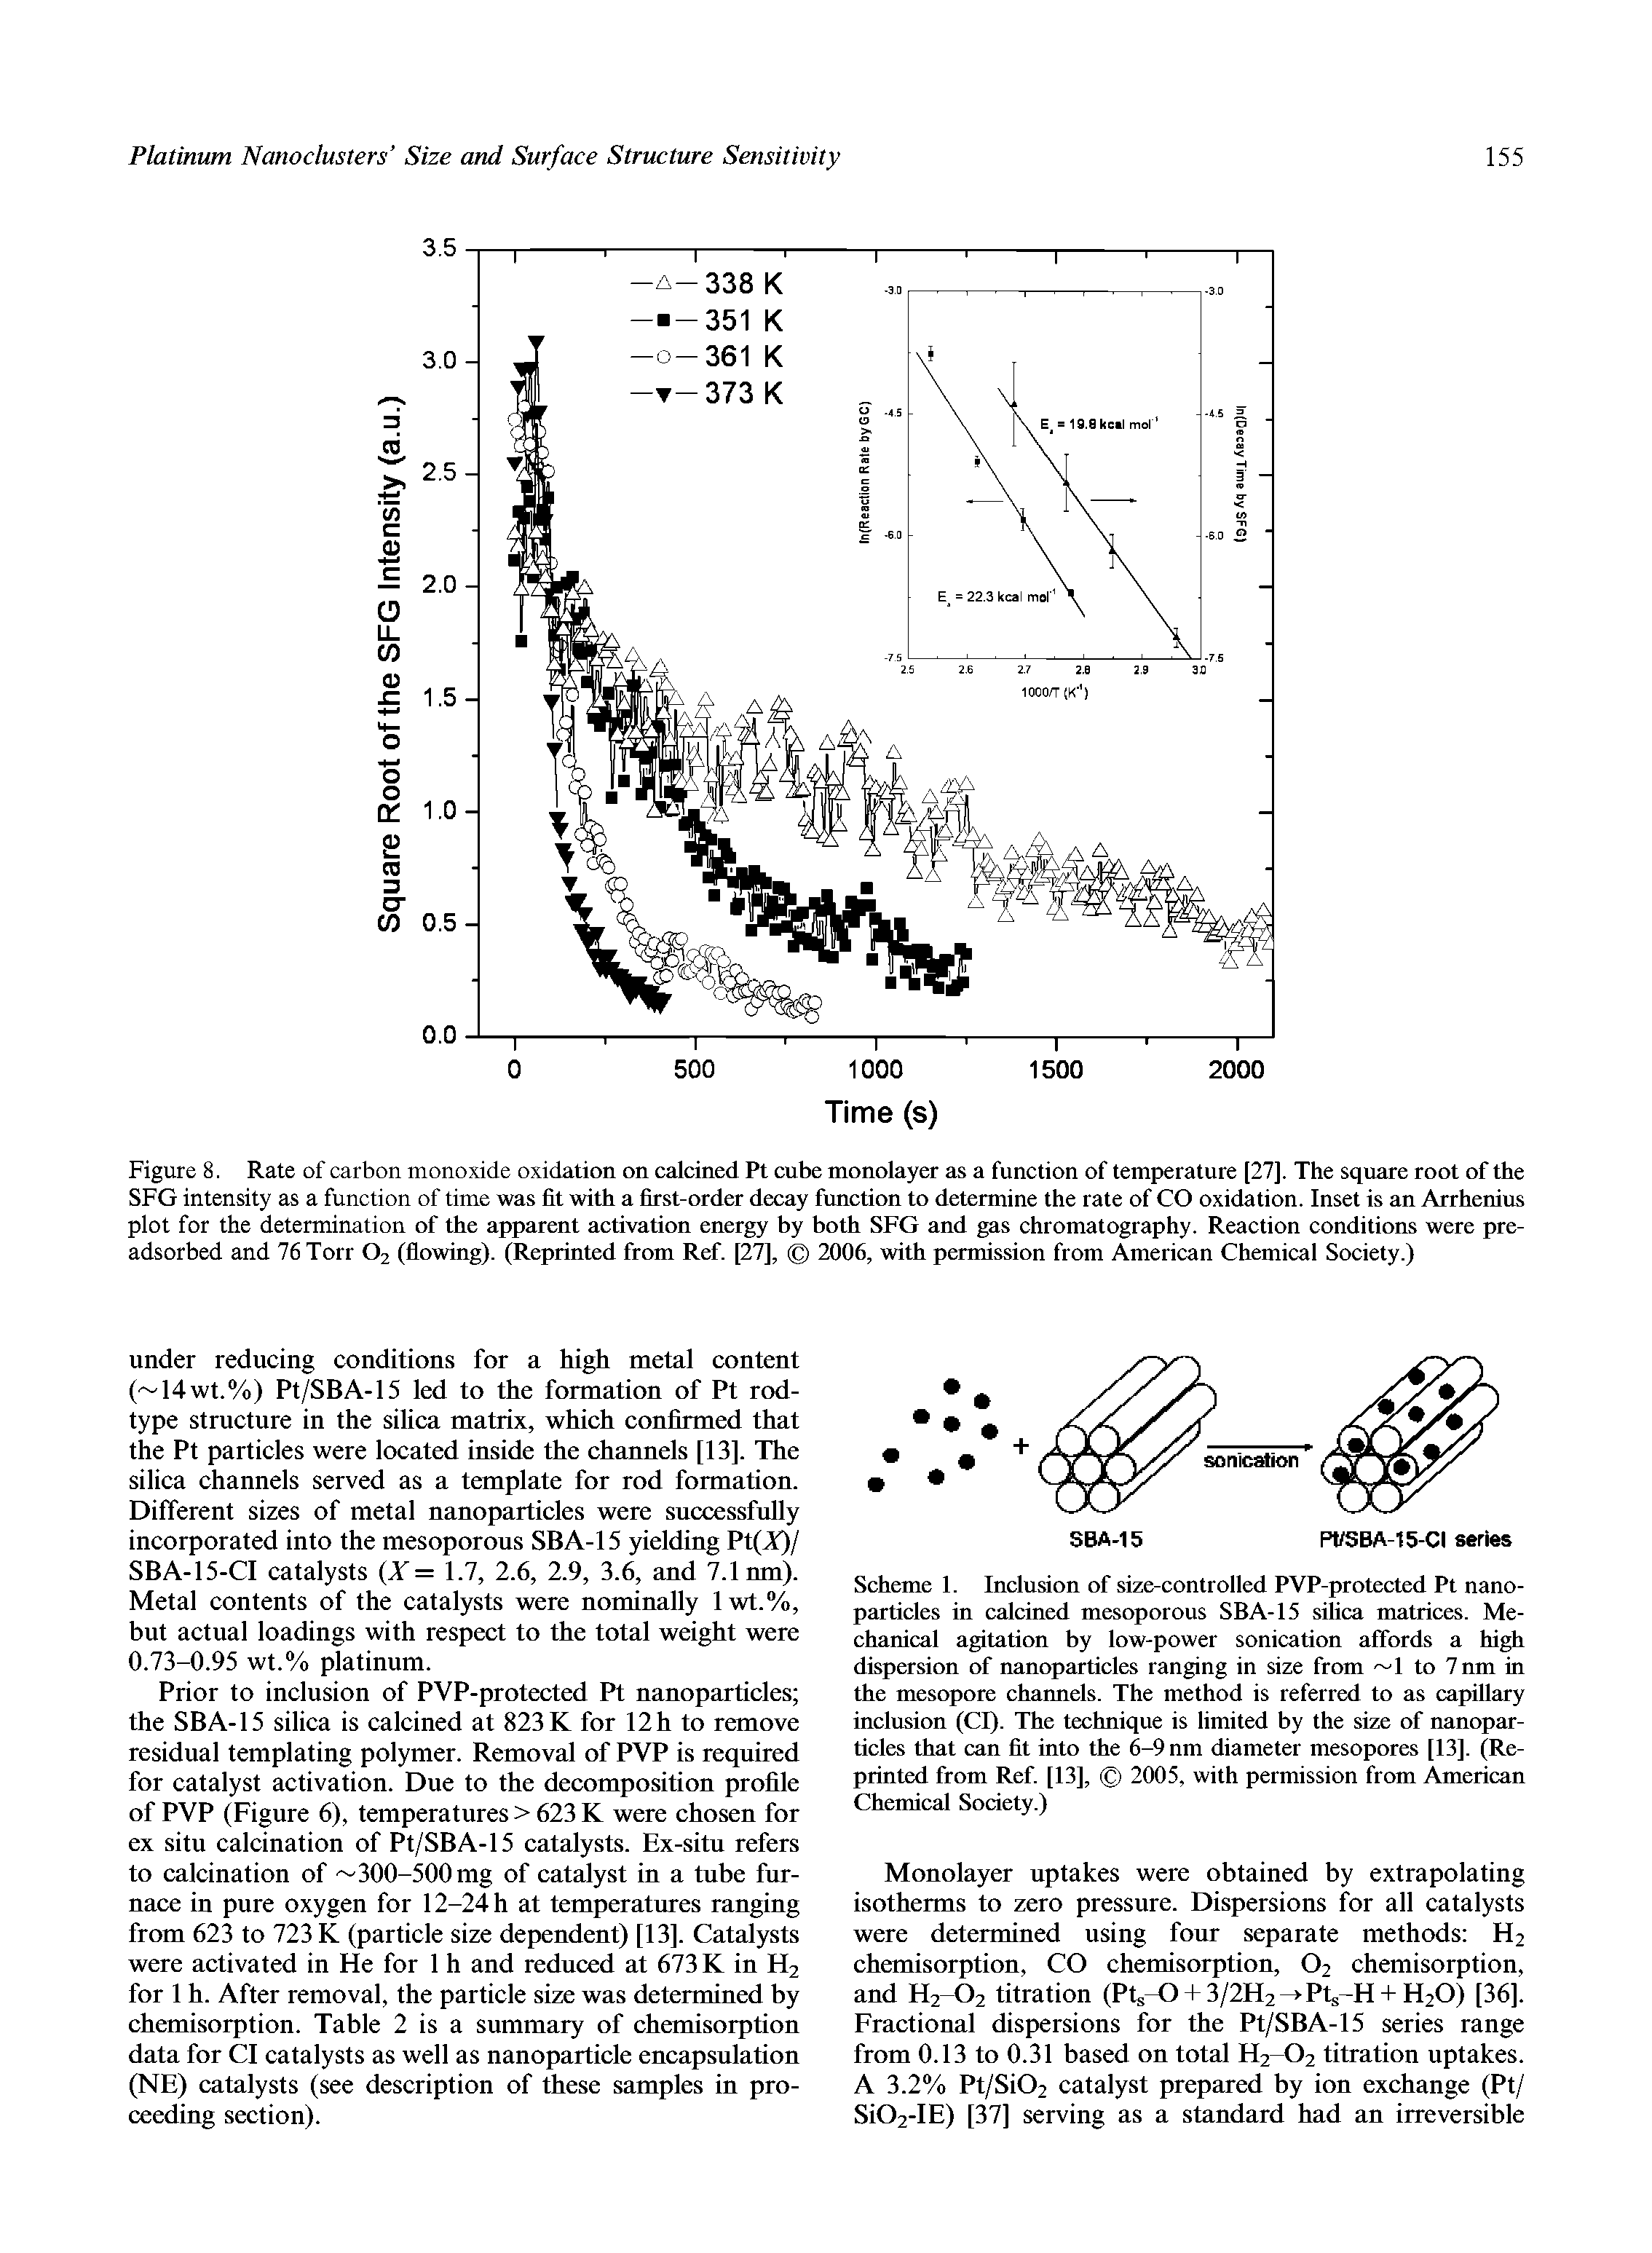 Figure 8. Rate of carbon monoxide oxidation on calcined Pt cube monolayer as a function of temperature [27]. The square root of the SFG intensity as a function of time was fit with a first-order decay function to determine the rate of CO oxidation. Inset is an Arrhenius plot for the determination of the apparent activation energy by both SFG and gas chromatography. Reaction conditions were preadsorbed and 76 Torr O2 (flowing). (Reprinted from Ref. [27], 2006, with permission from American Chemical Society.)...